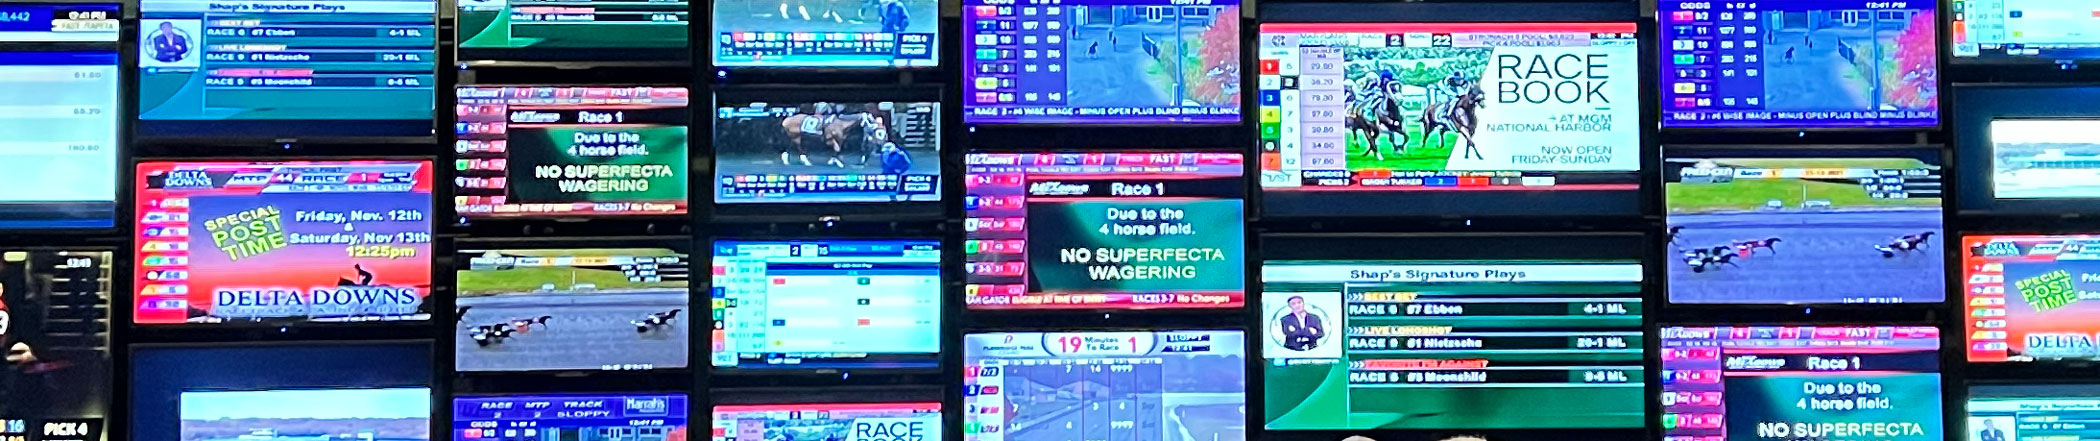 Mac's Downtown Off Track Betting